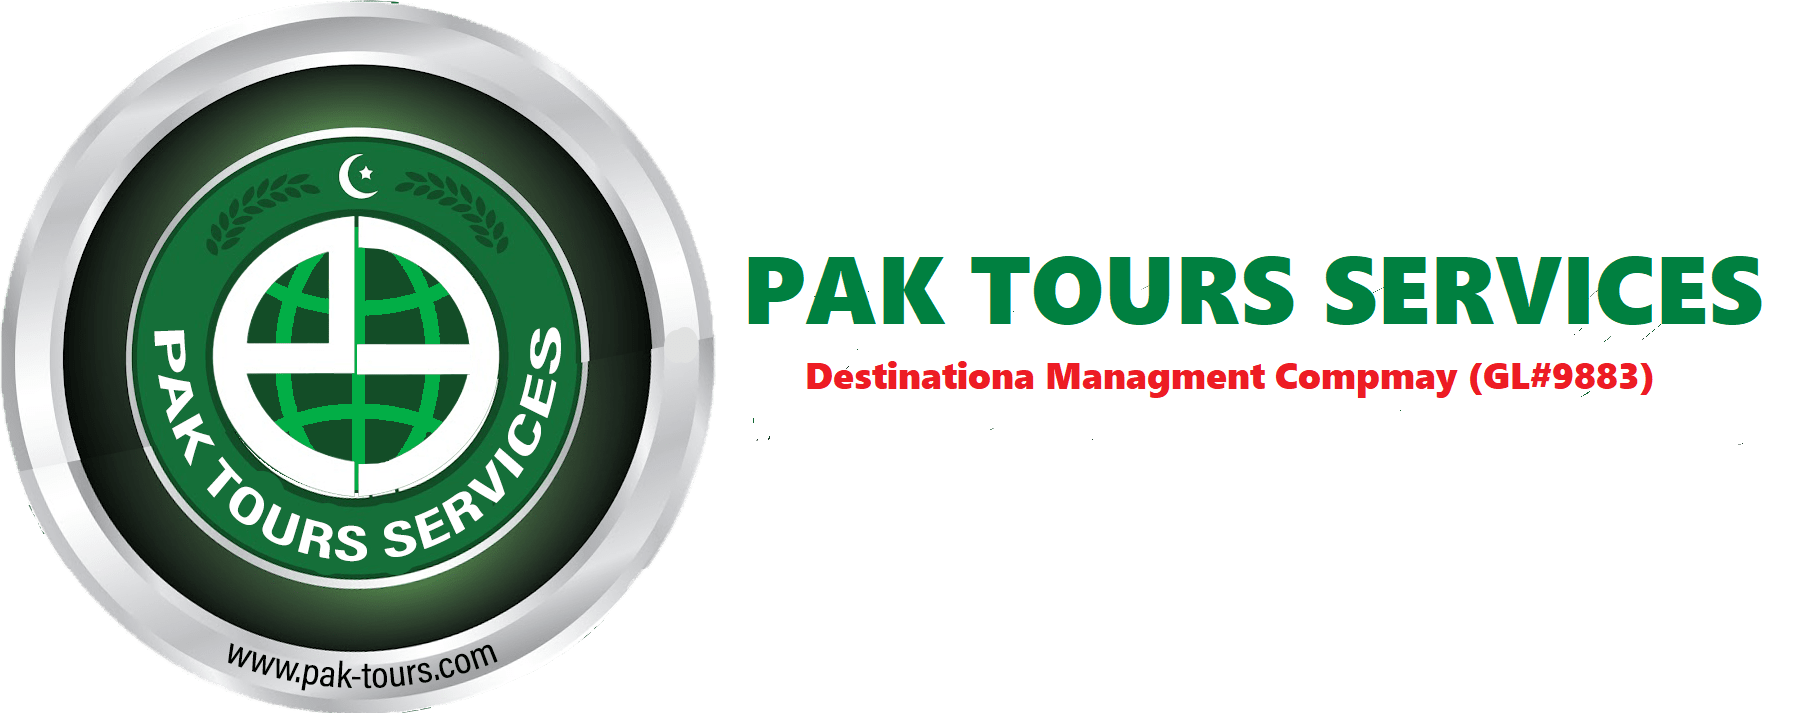 Your Trusted Travel Partner | Mohenjo daro & Taxila The Oldest Civilizations 7 Days Tour